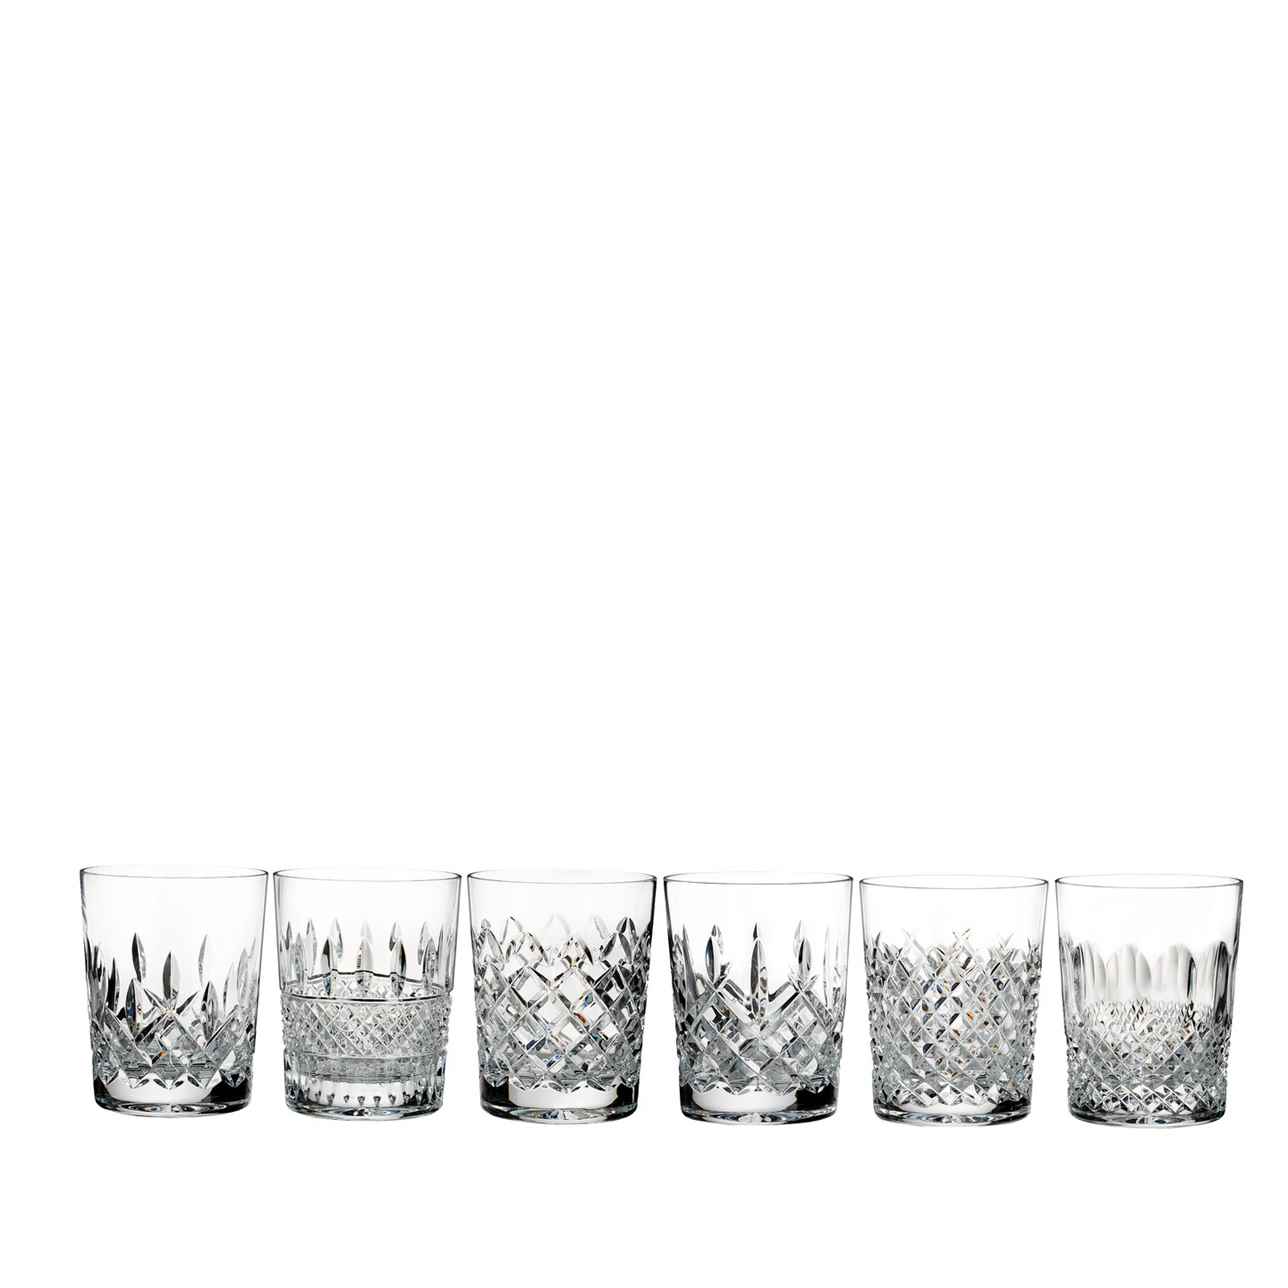  Lismore Connoisseur Heritage Whiskey Glass, Set of 6 